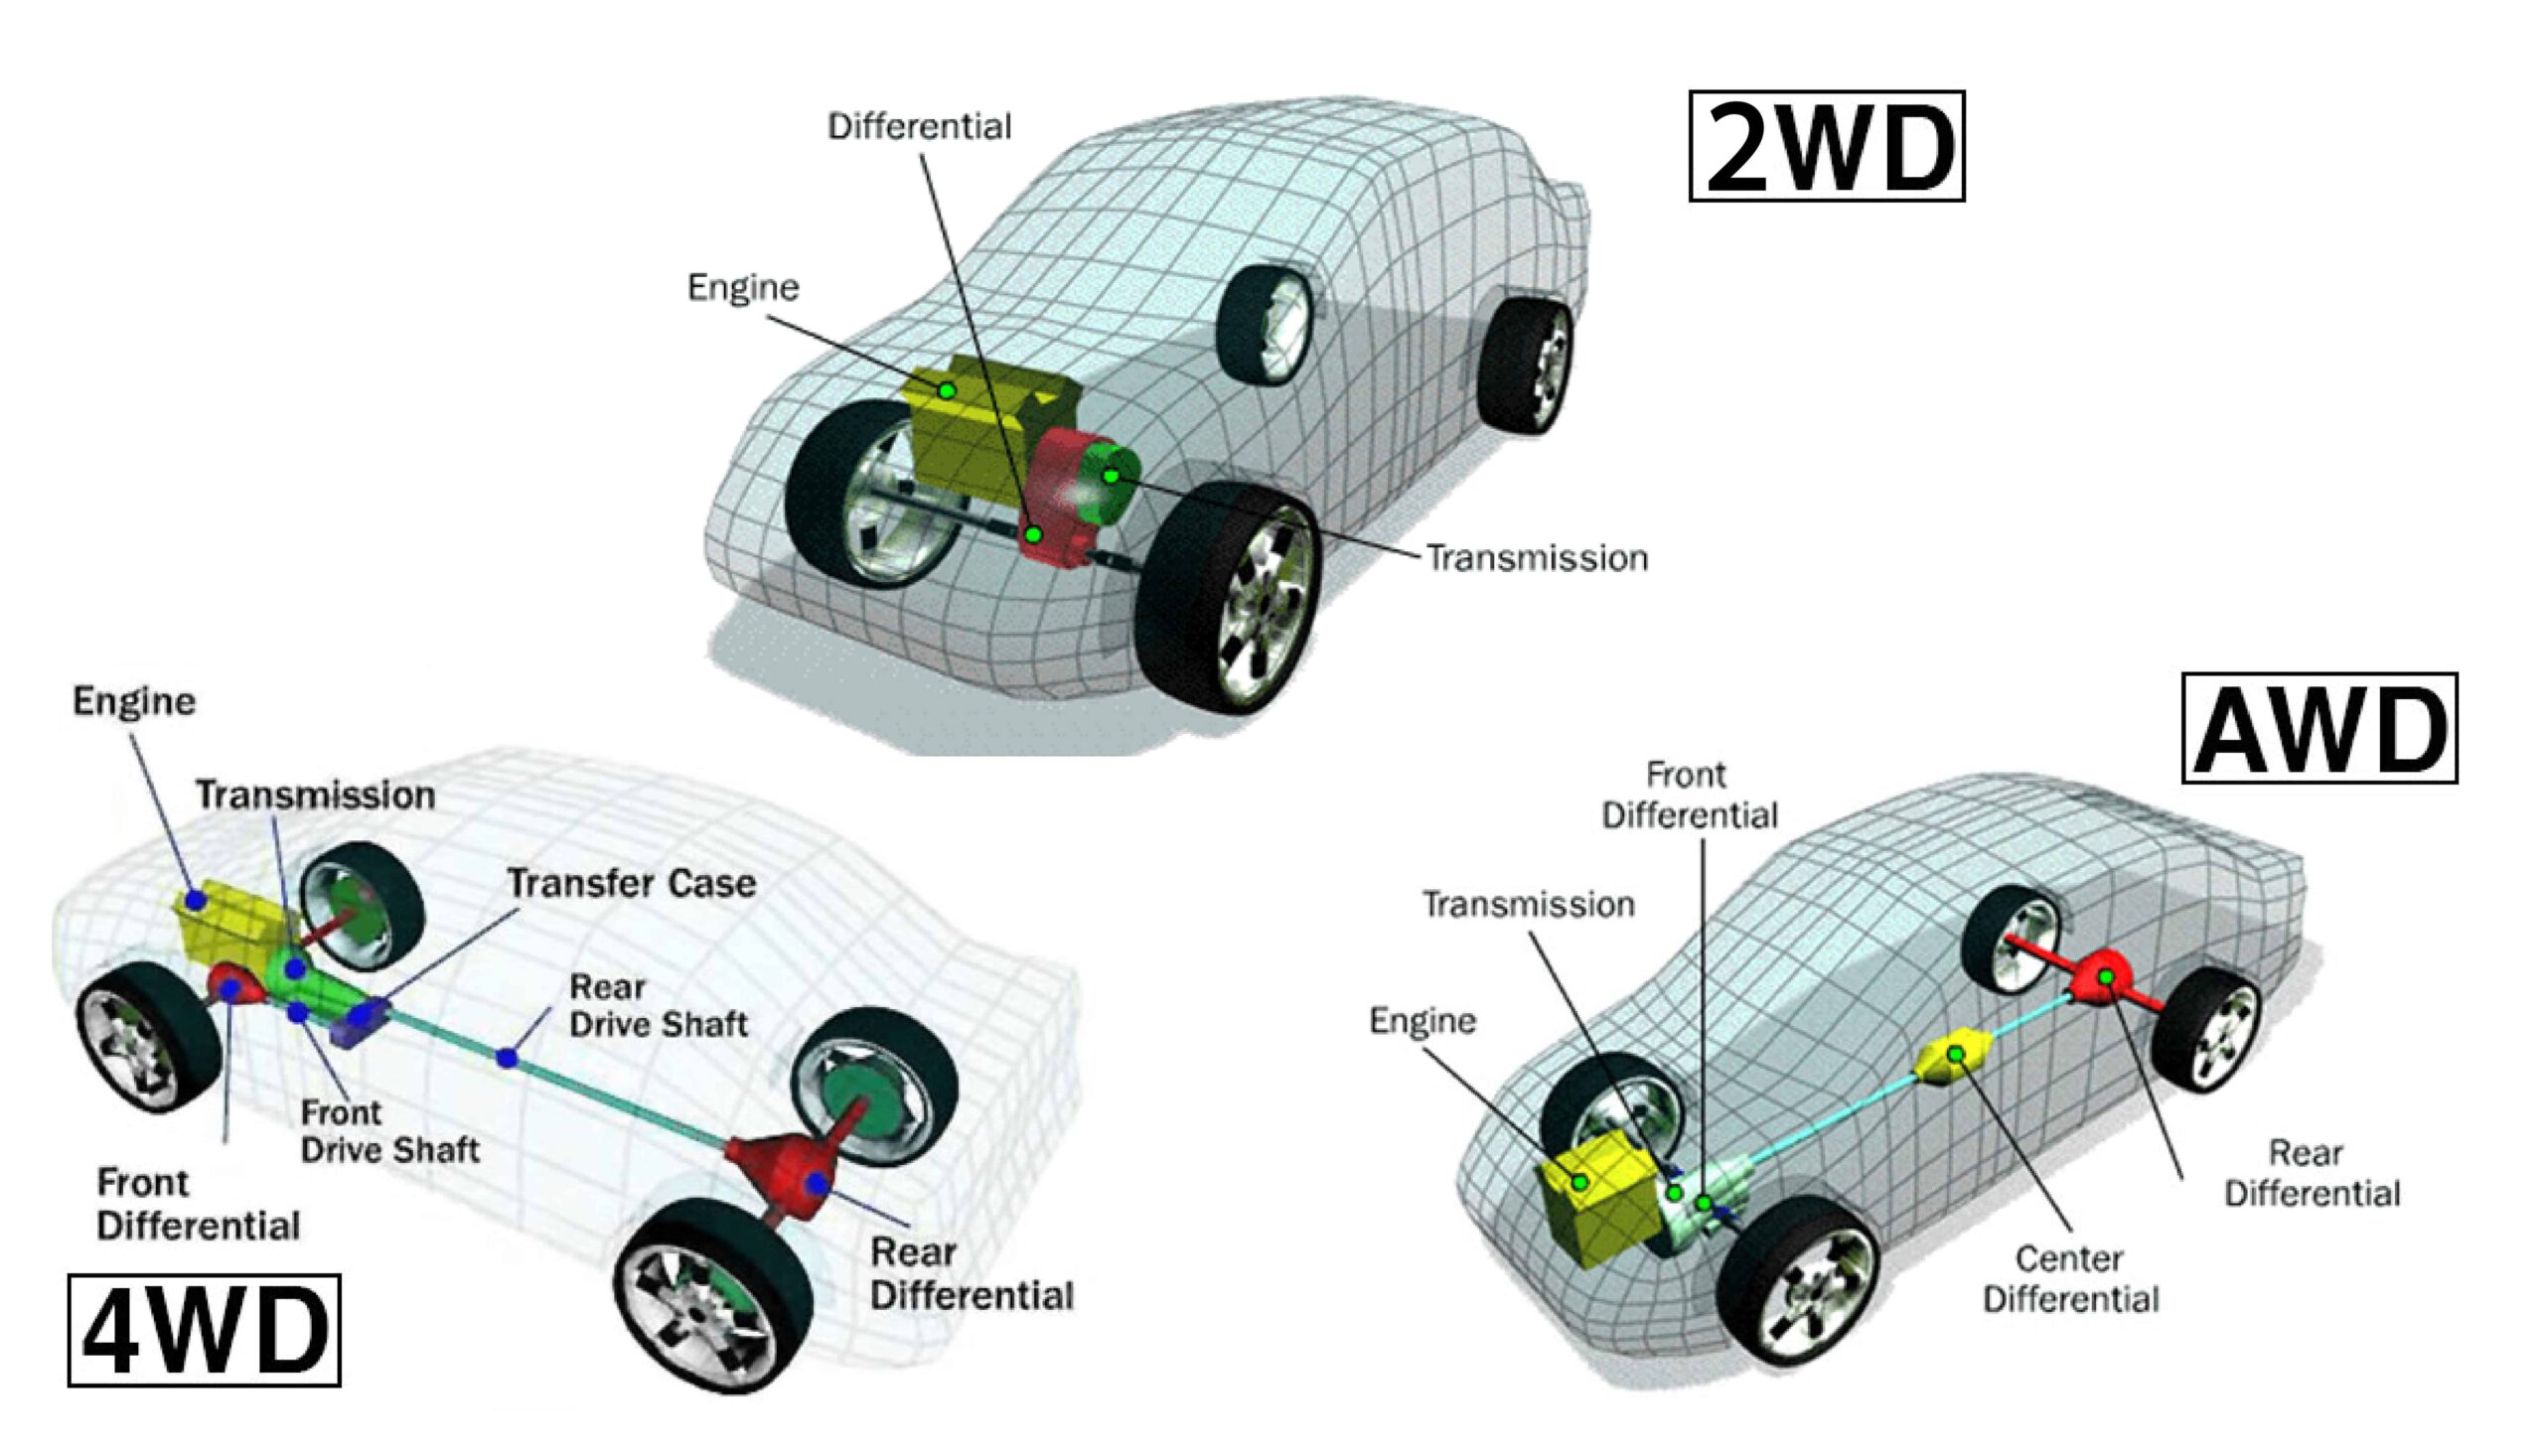 2WD vs 4WD vs AWD - What’s the difference?